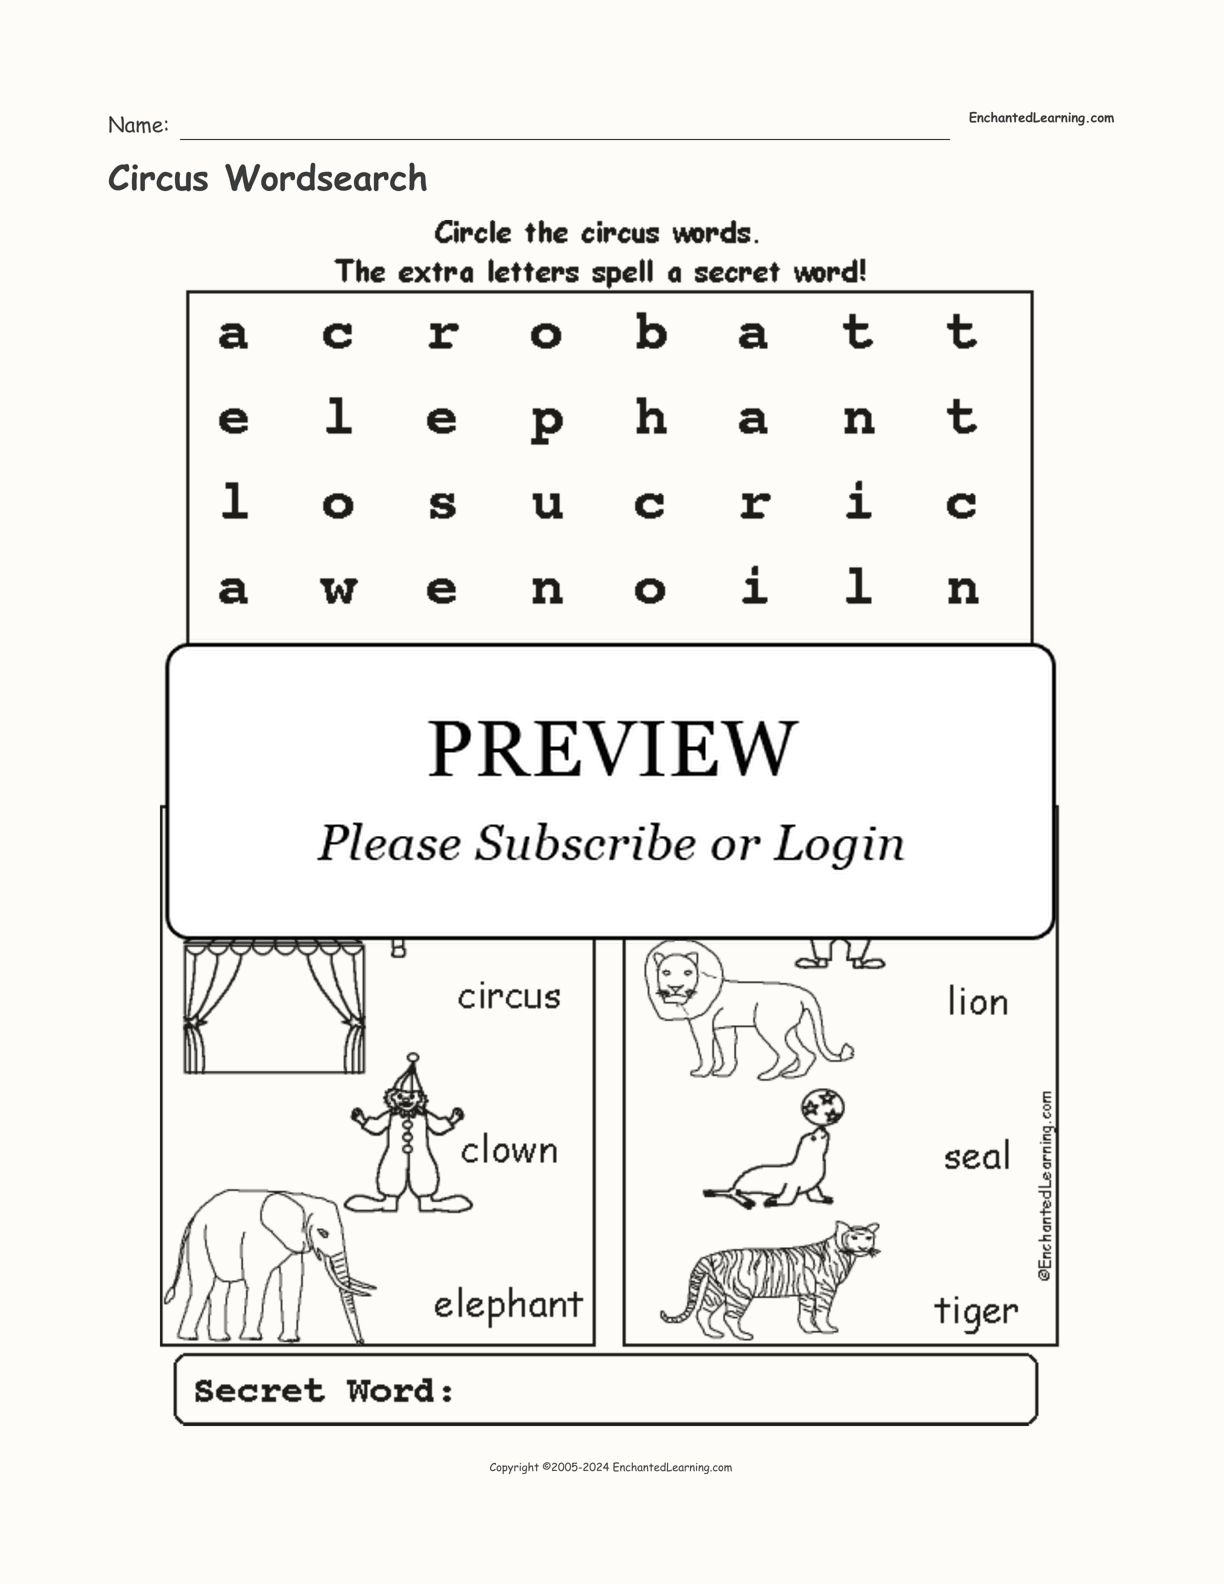 Circus Wordsearch interactive worksheet page 1